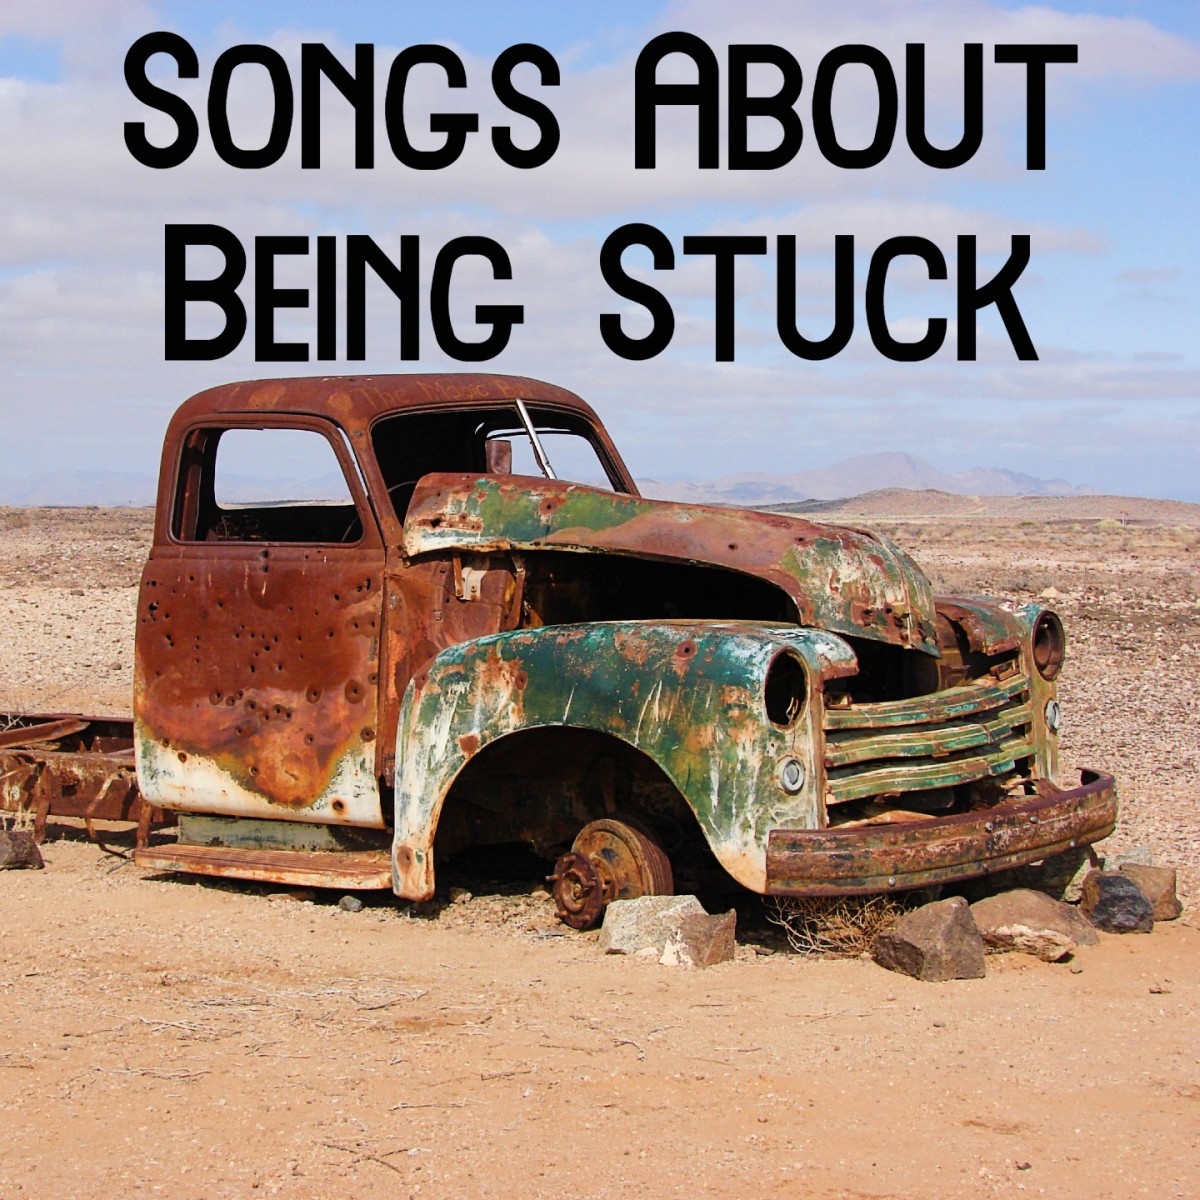 54 Songs About Being Stuck